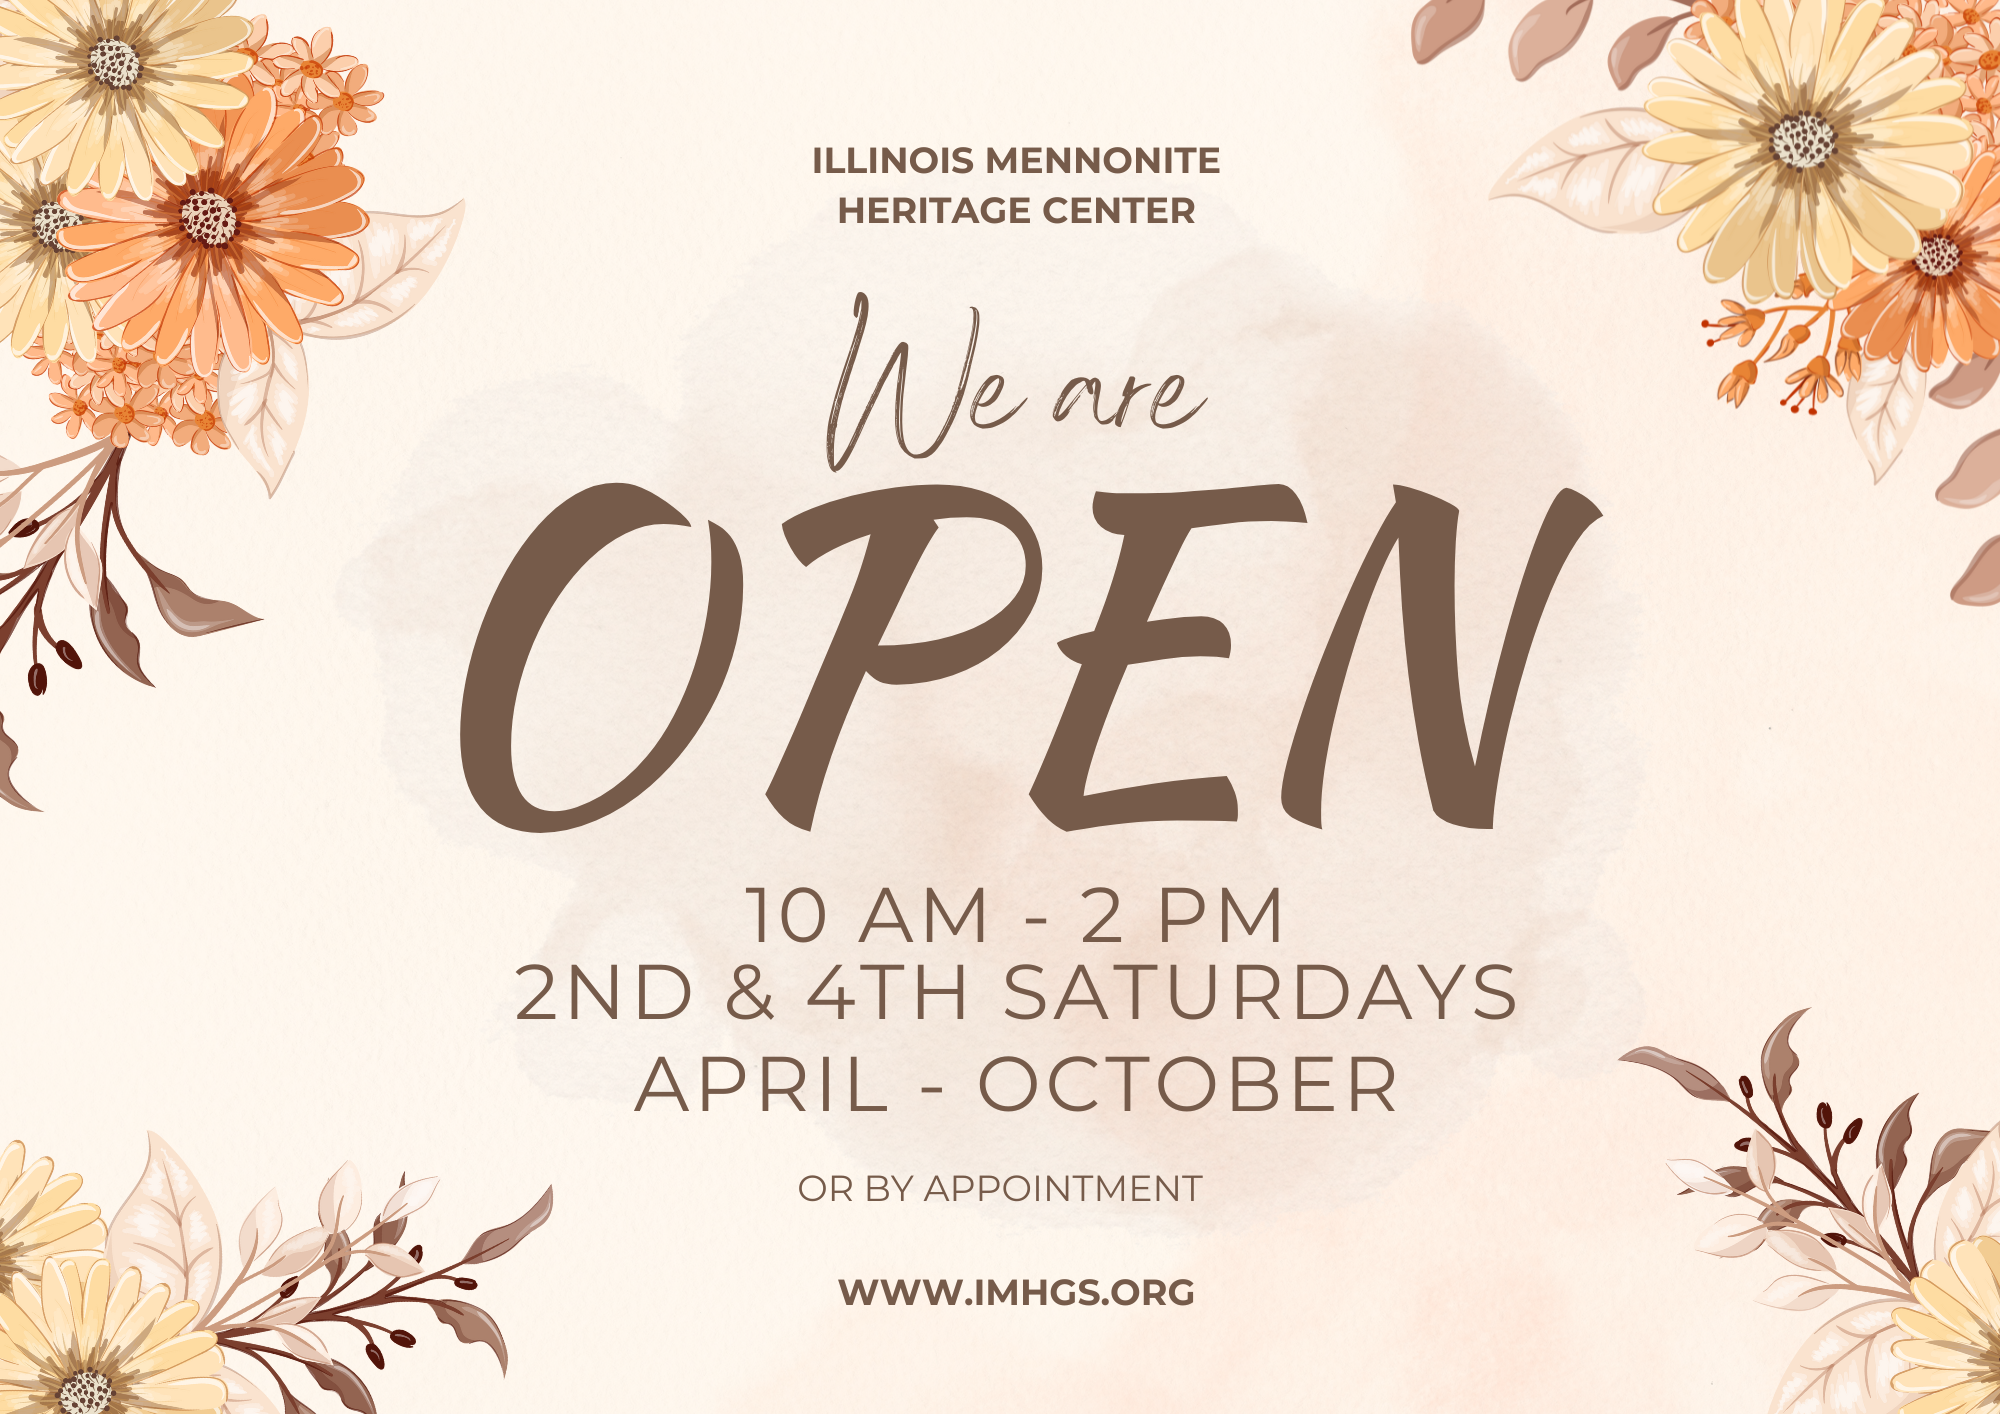 Open April through October on second and fourth Saturdays of the month, from 10 am to 2 pm. To make an appointment outside of regular visiting hours, please email us using the email address listed on website or contact a Board Member.